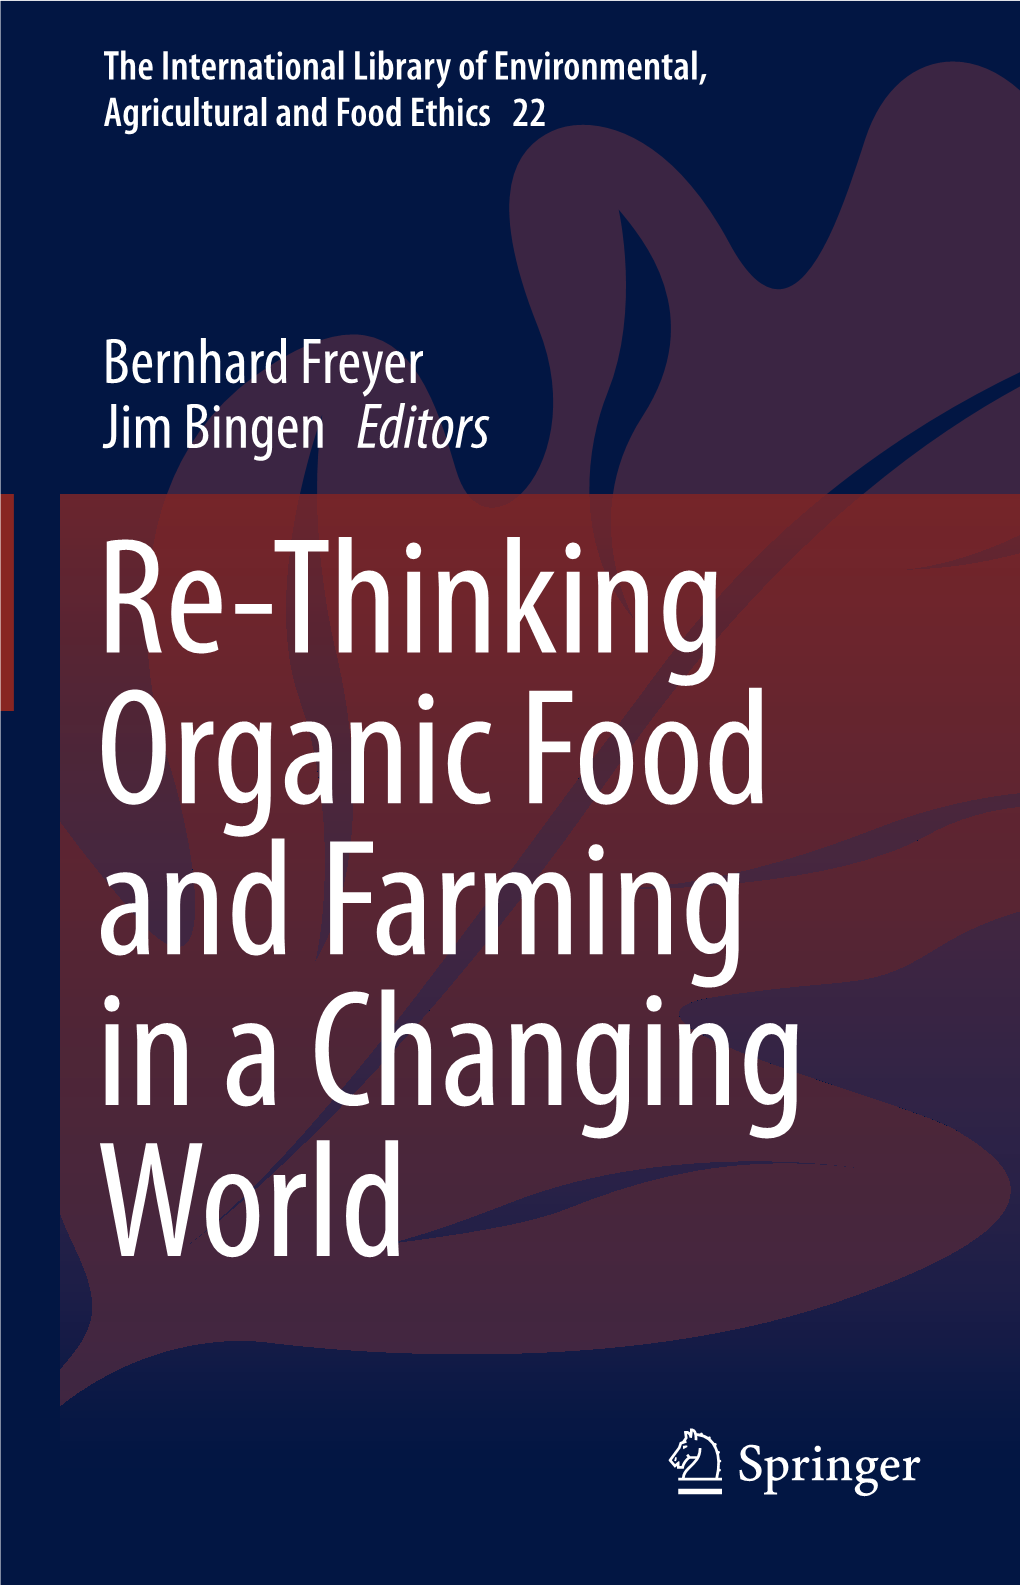 Bernhard Freyer Jim Bingen Editors Re-Thinking Organic Food and Farming in a Changing World the International Library of Environmental, Agricultural and Food Ethics